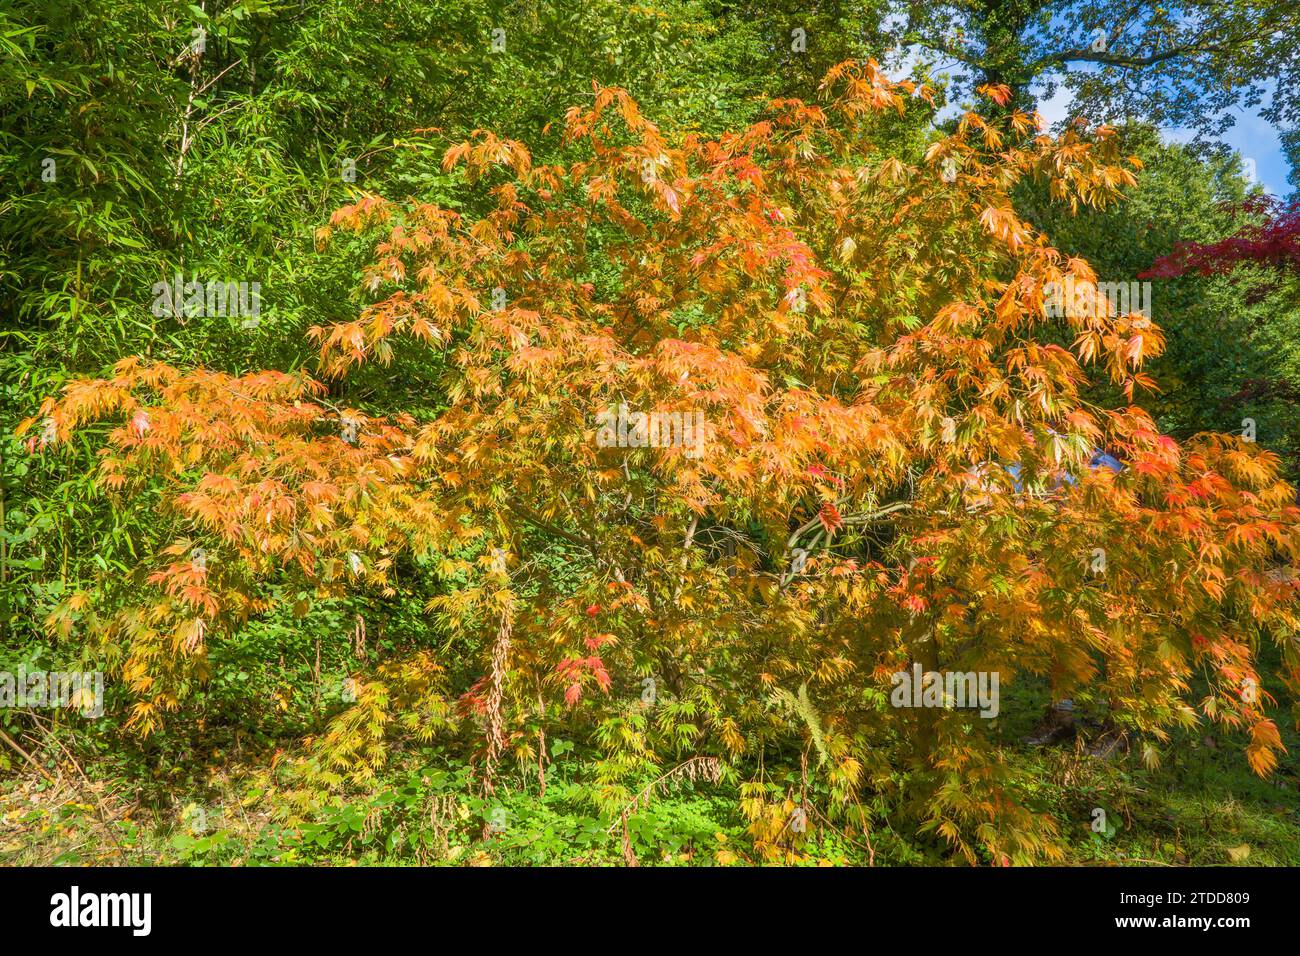 Japanese Maple (Acer palmatum) Queenswood Country Park Herefordshire UK. October 2020 Stock Photo